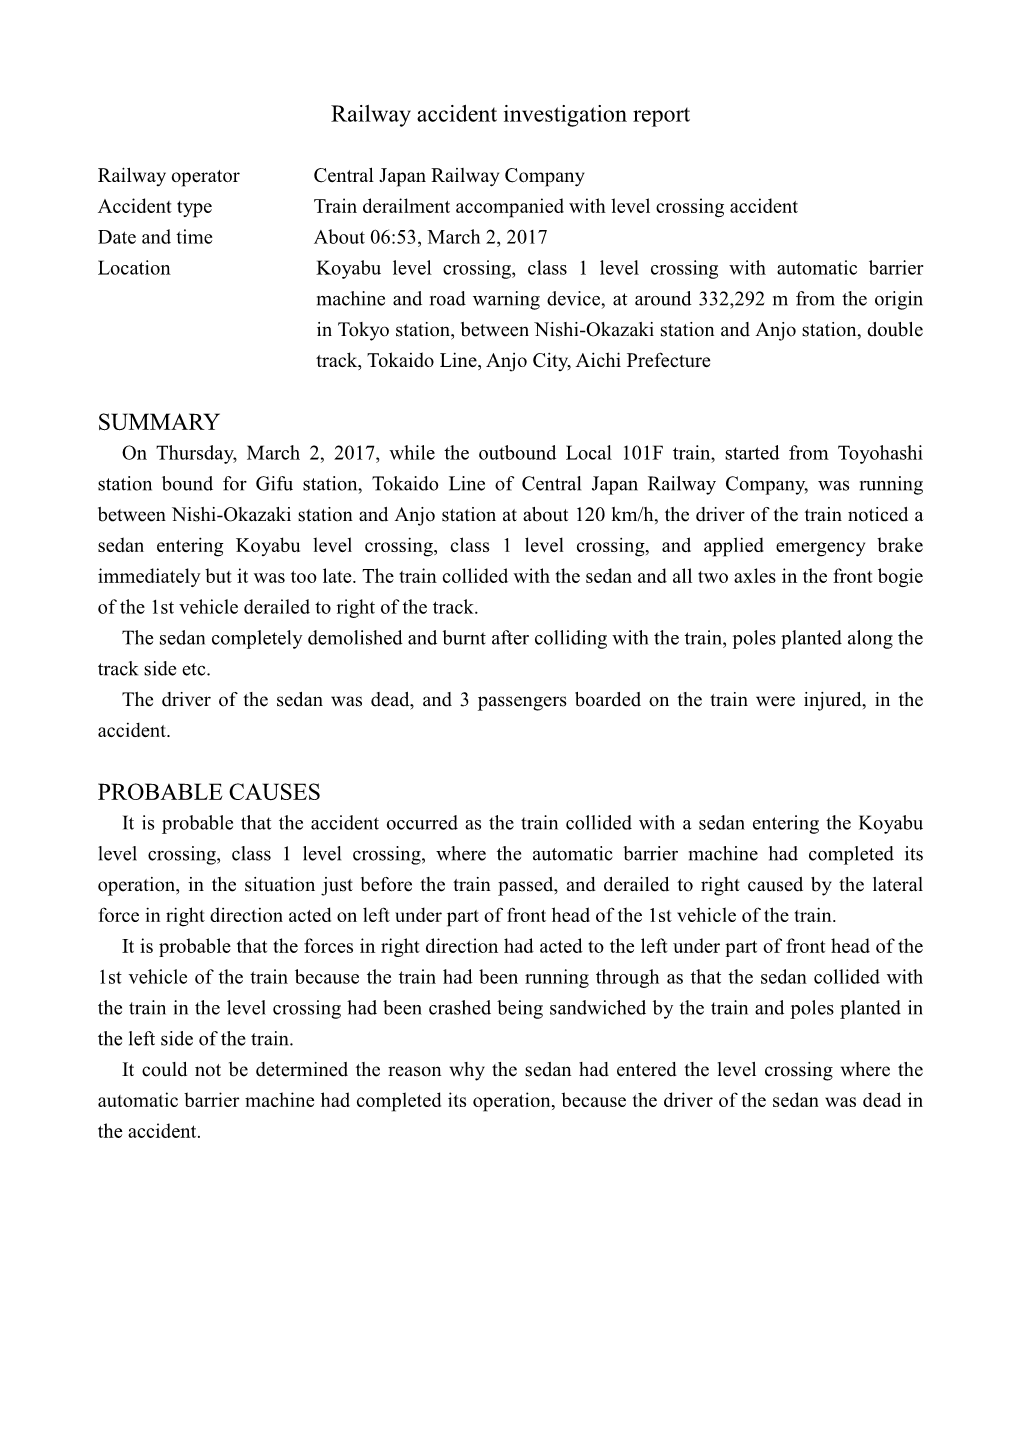 Railway Accident Investigation Report SUMMARY PROBABLE CAUSES